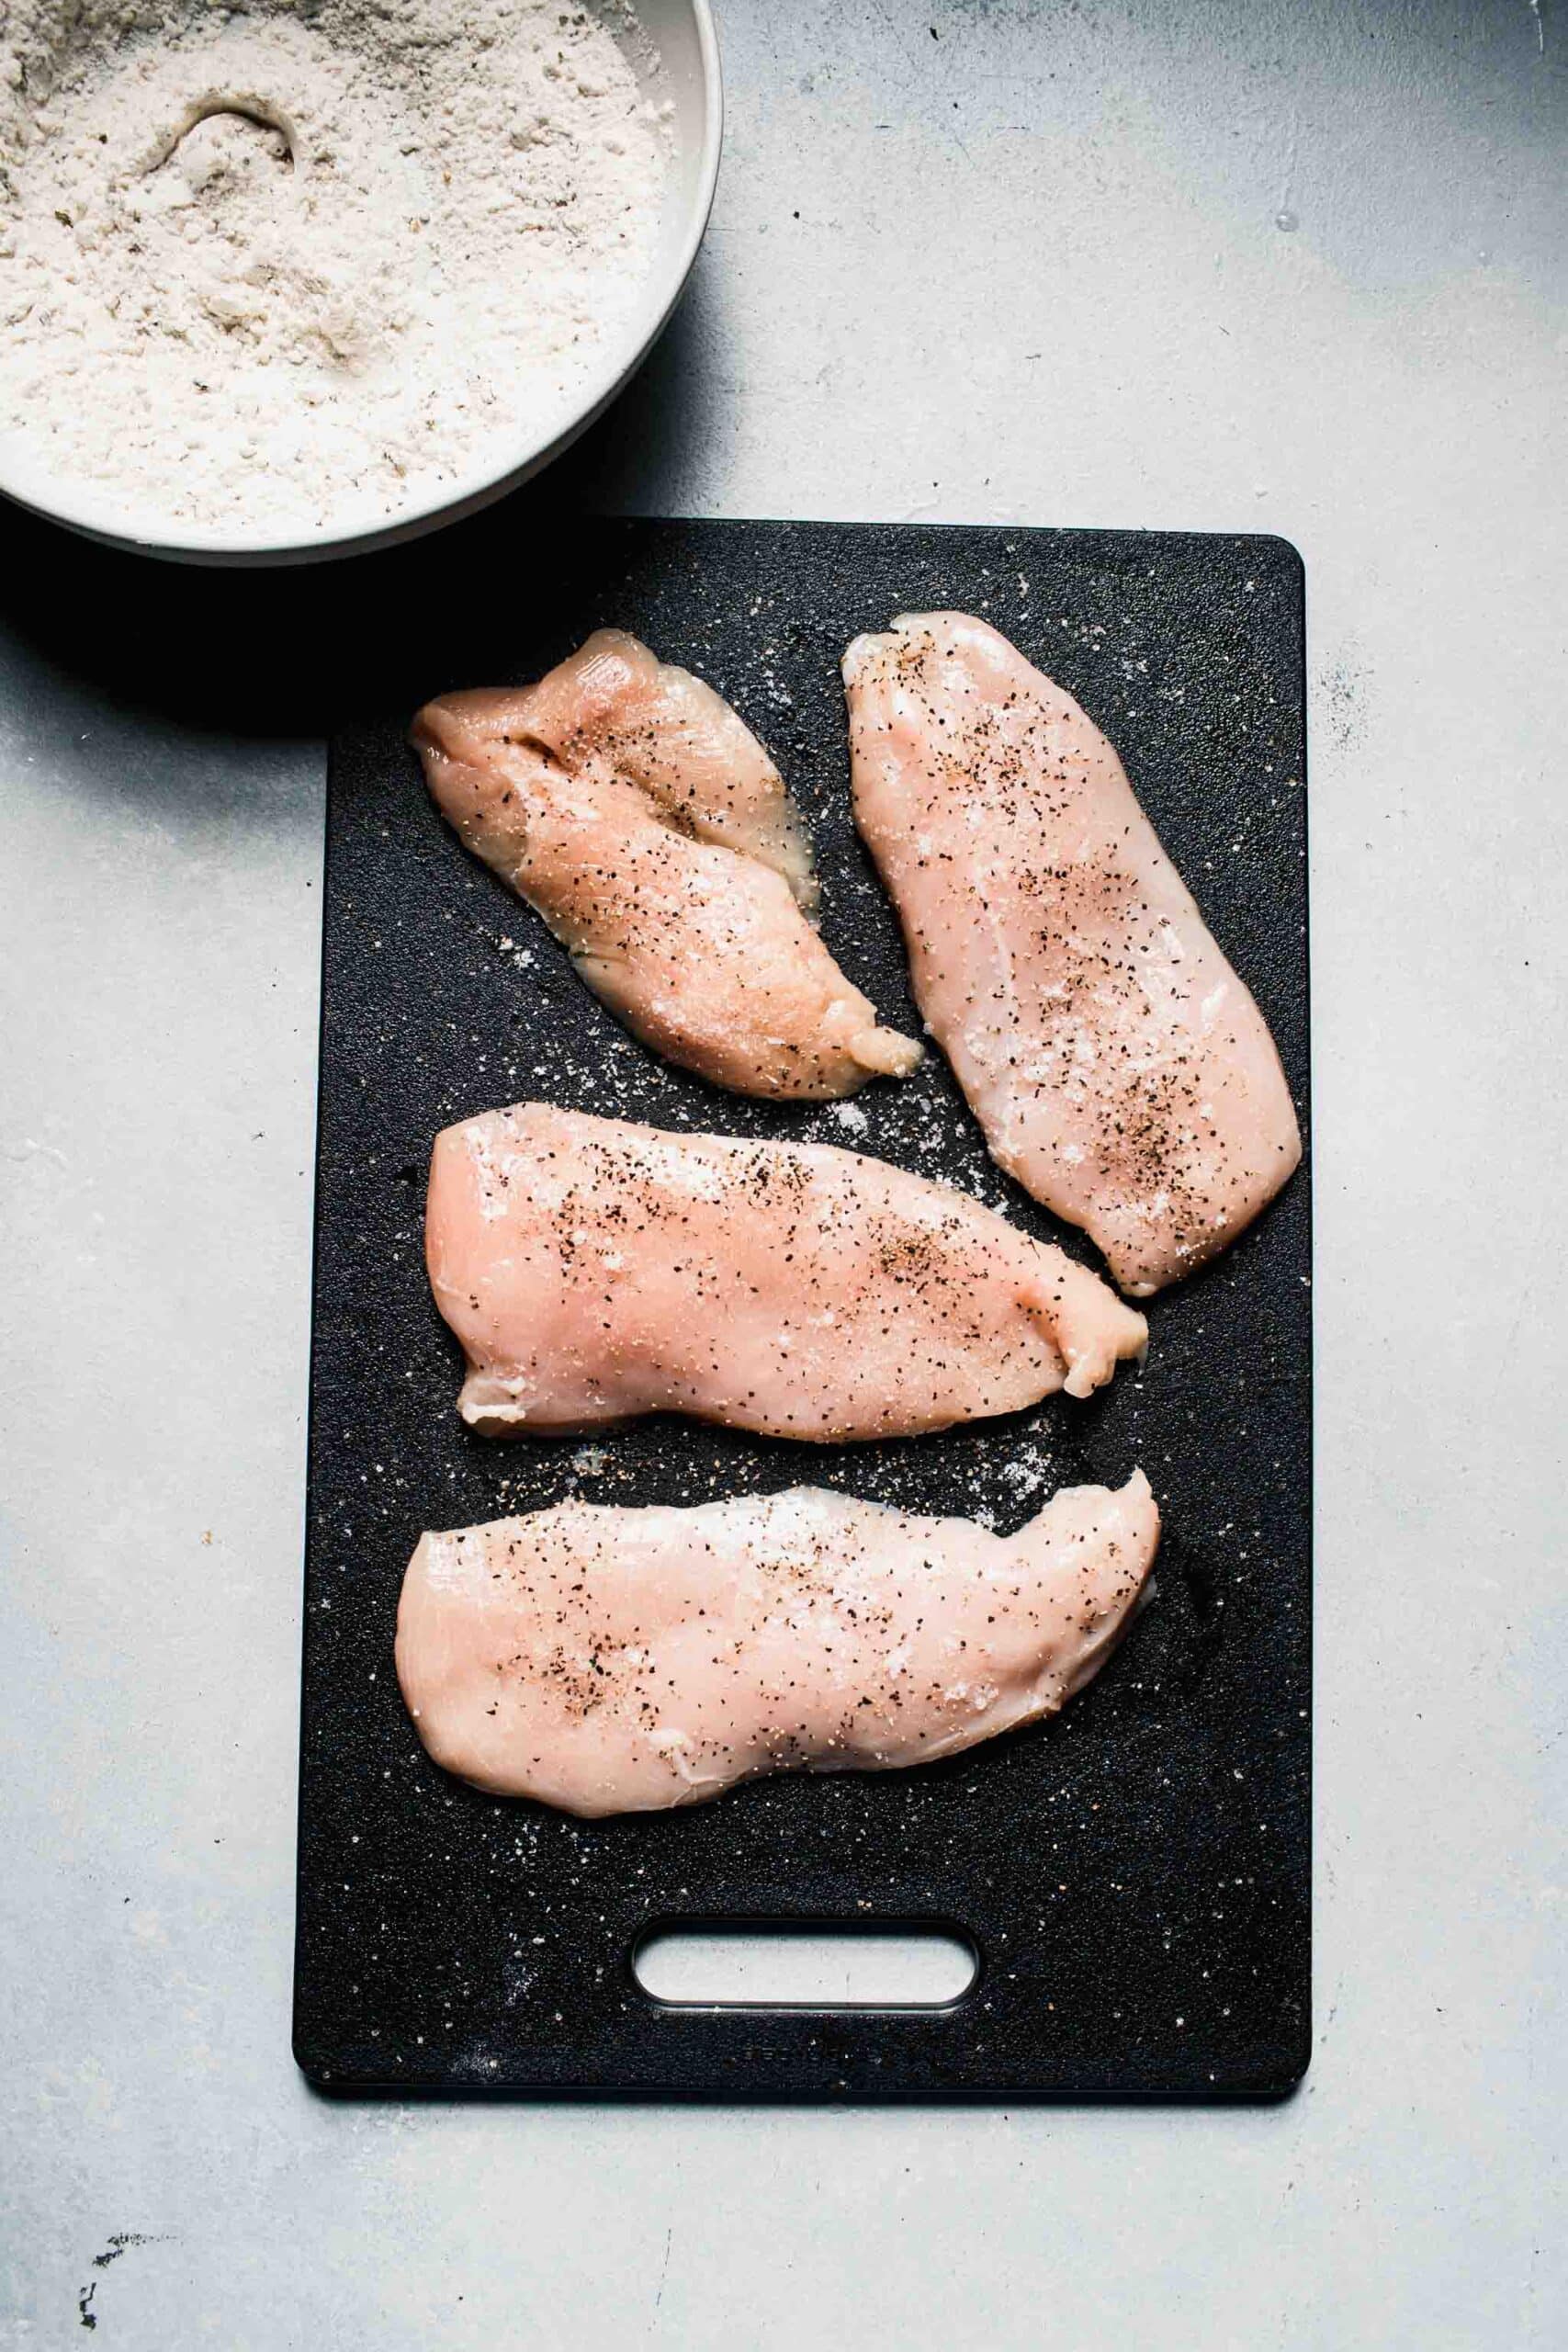 Thin chicken breasts sprinkled with pepper.